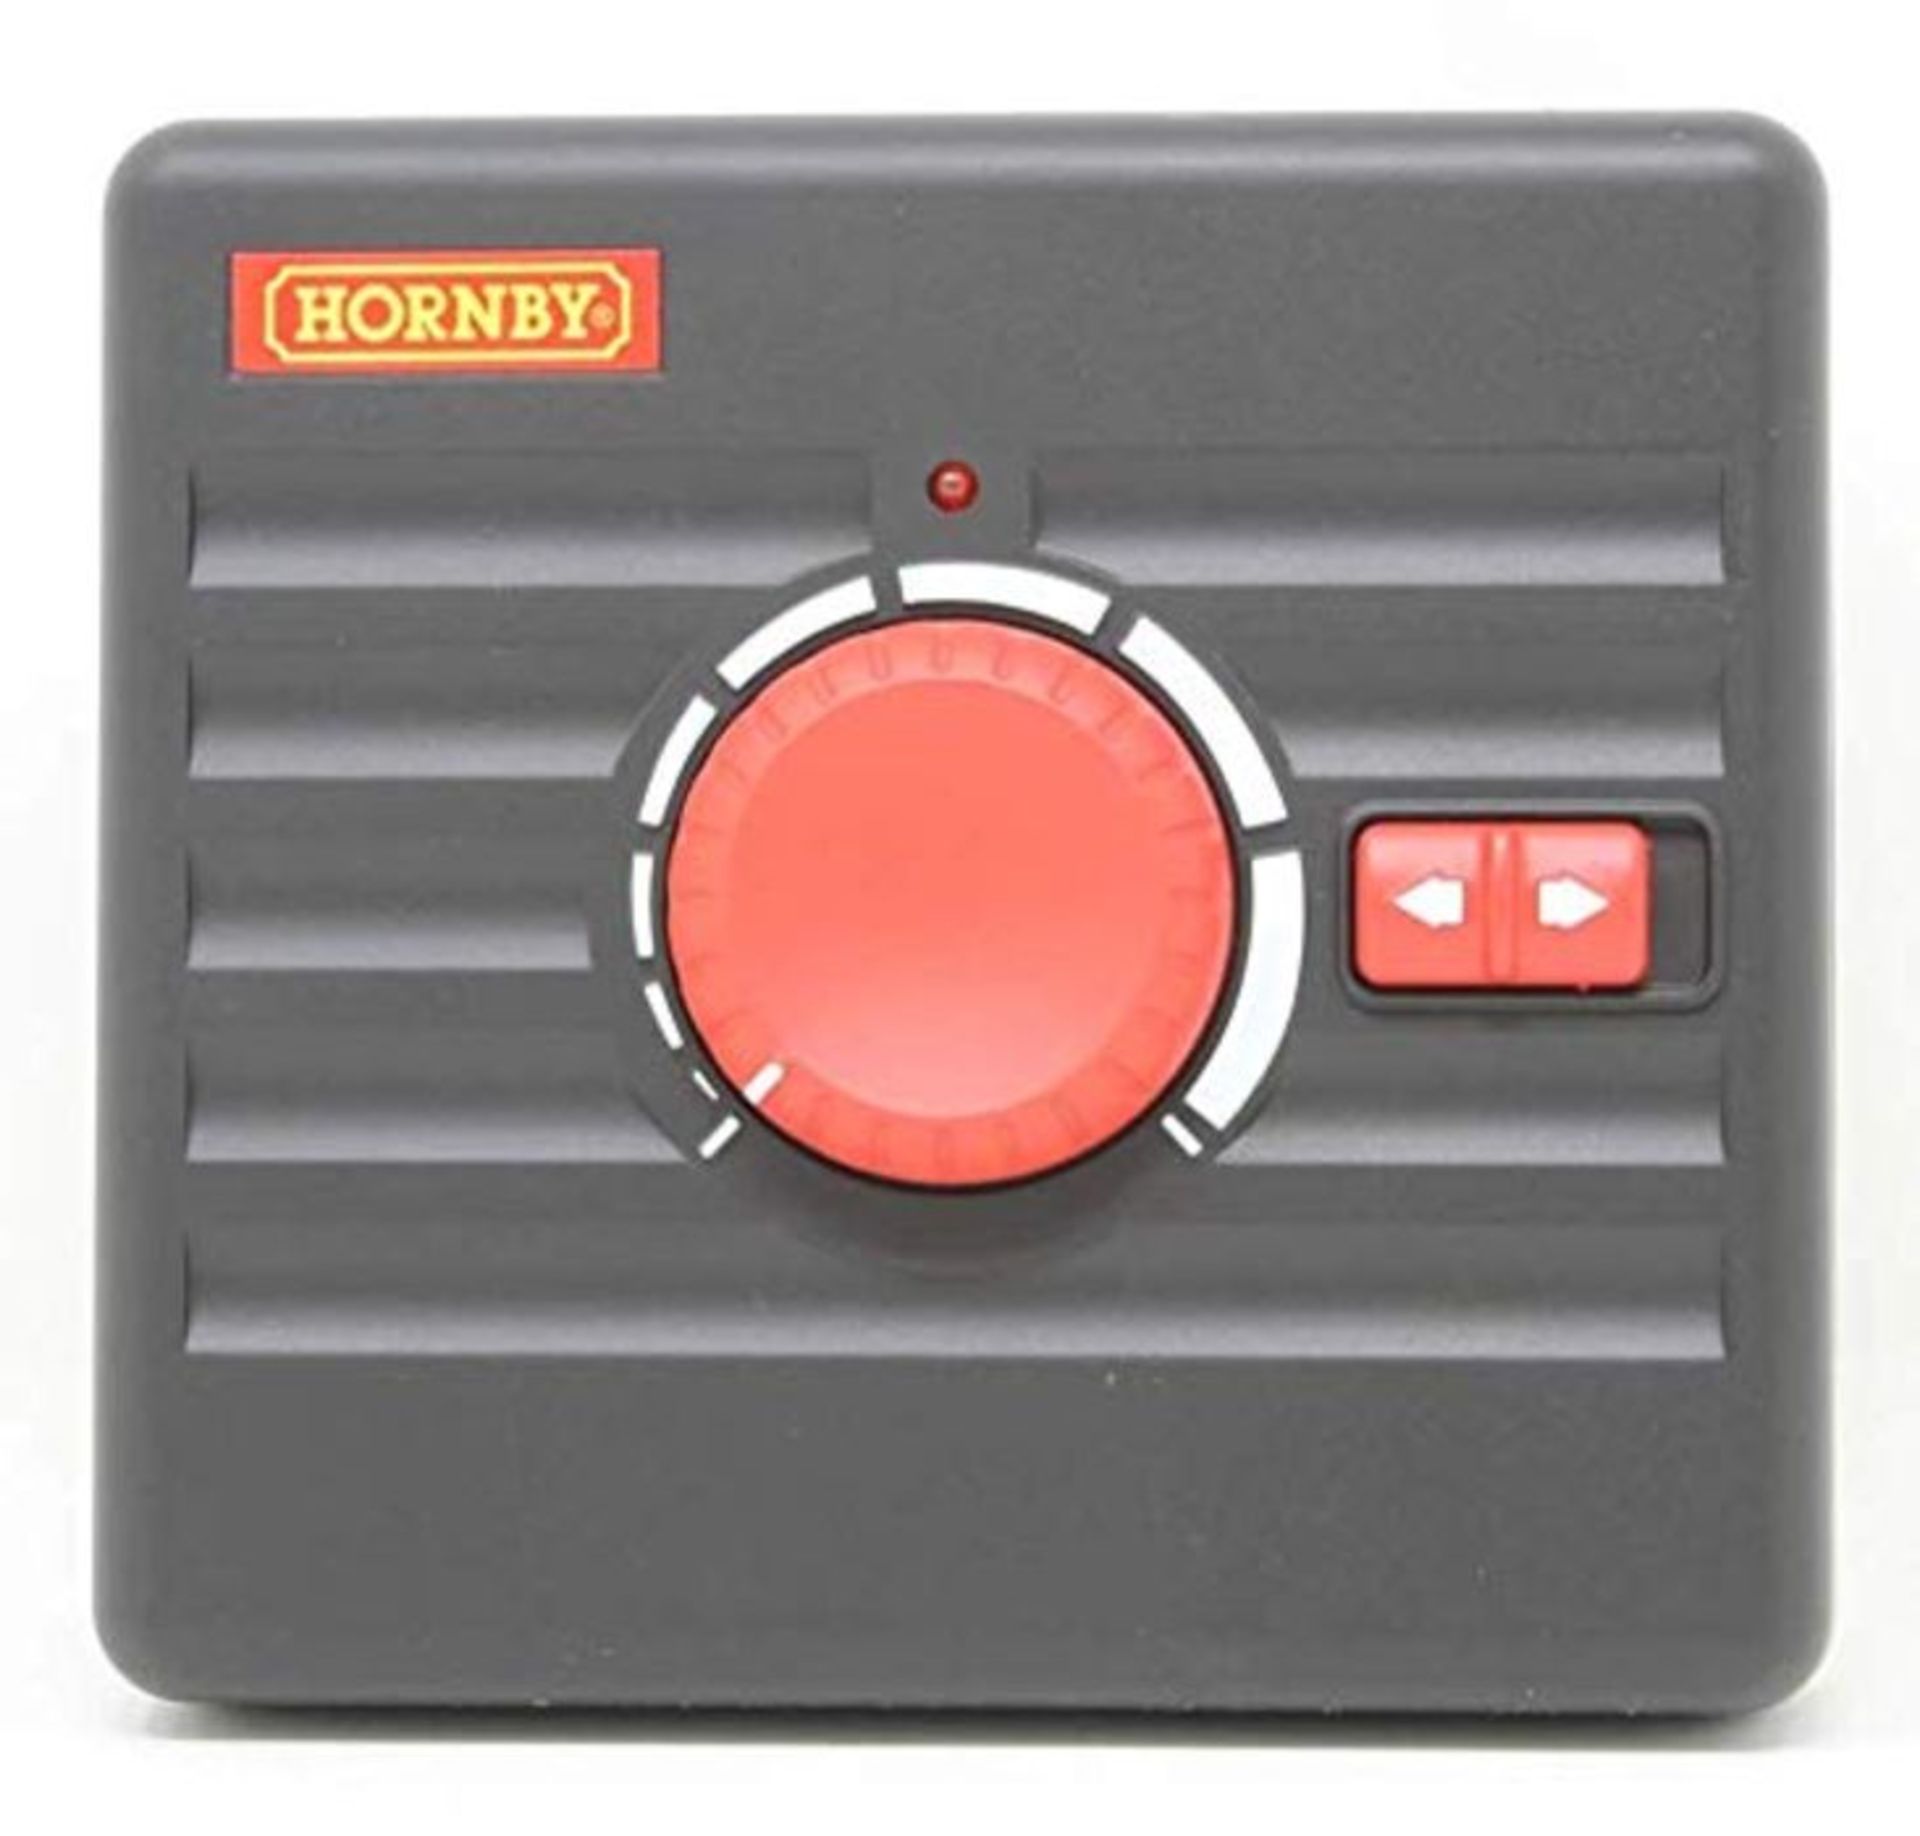 Hornby R7229 Analogue Train and Accessory Controller Rail Accessory